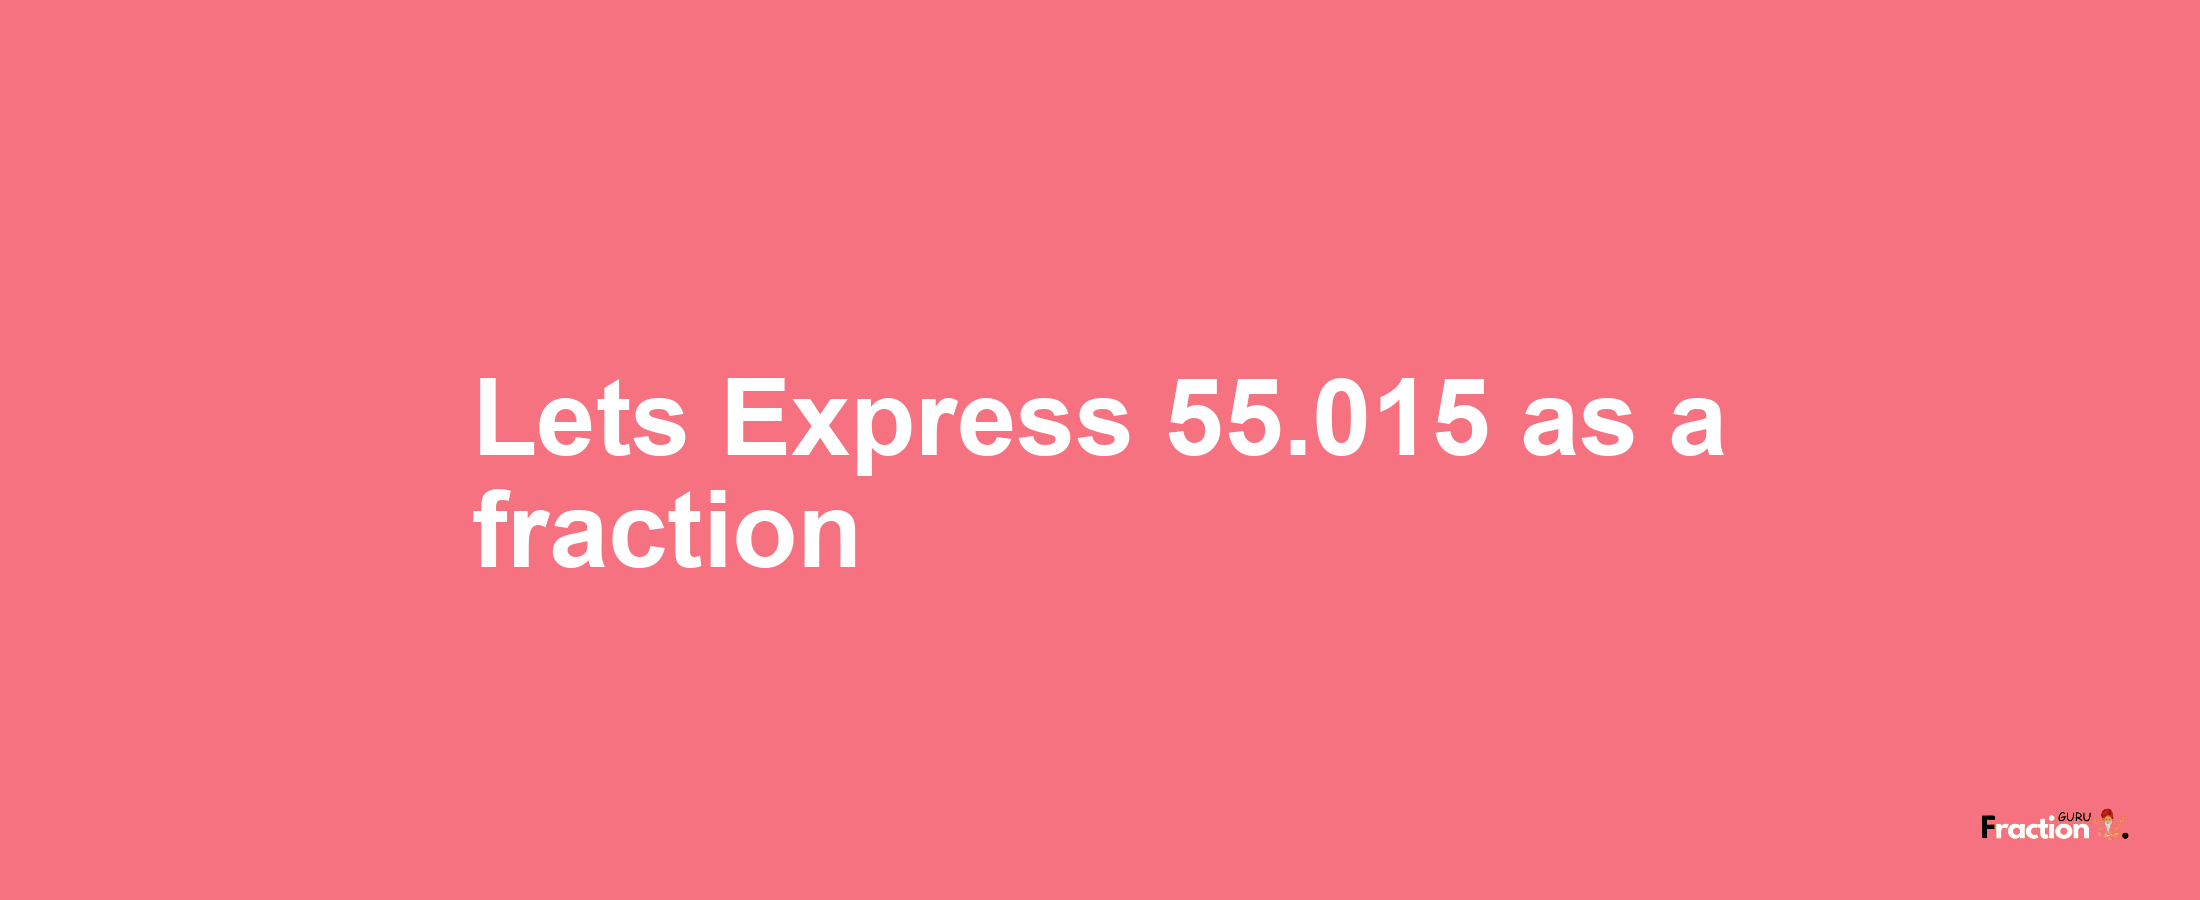 Lets Express 55.015 as afraction